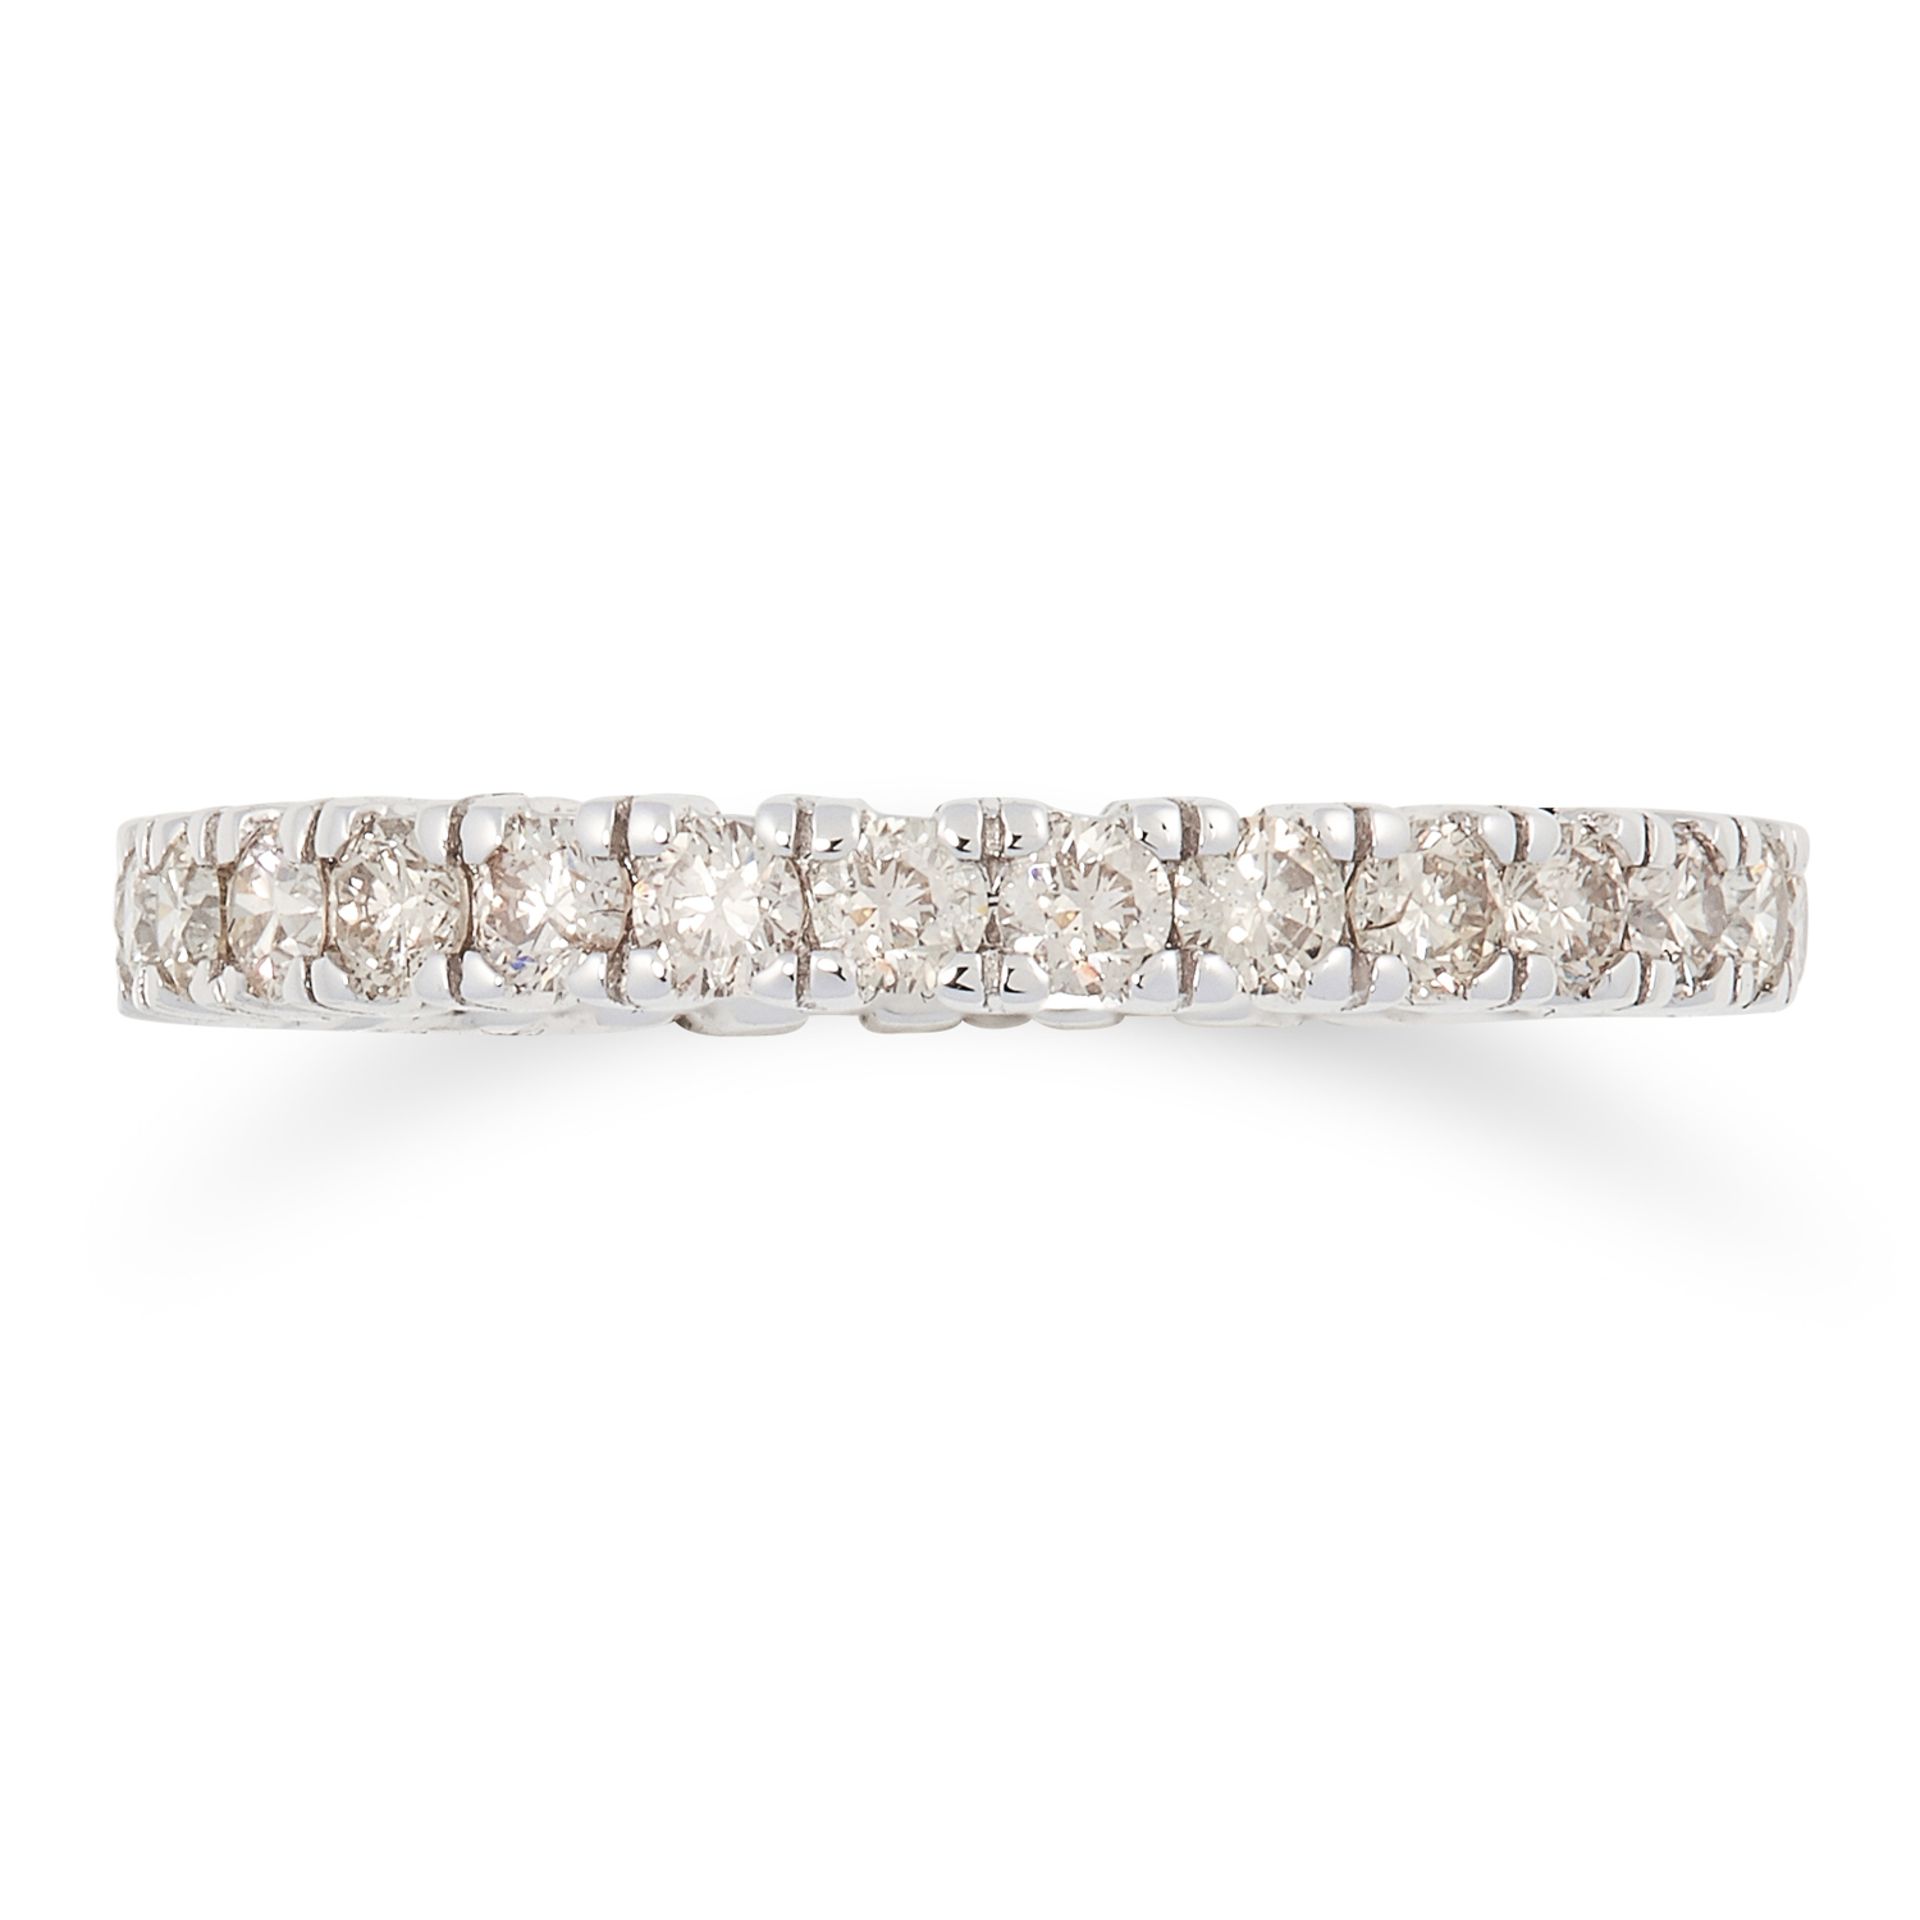 A DIAMOND FULL ETERNITY RING set with approximately 1.13 carats of round modern brilliant cut